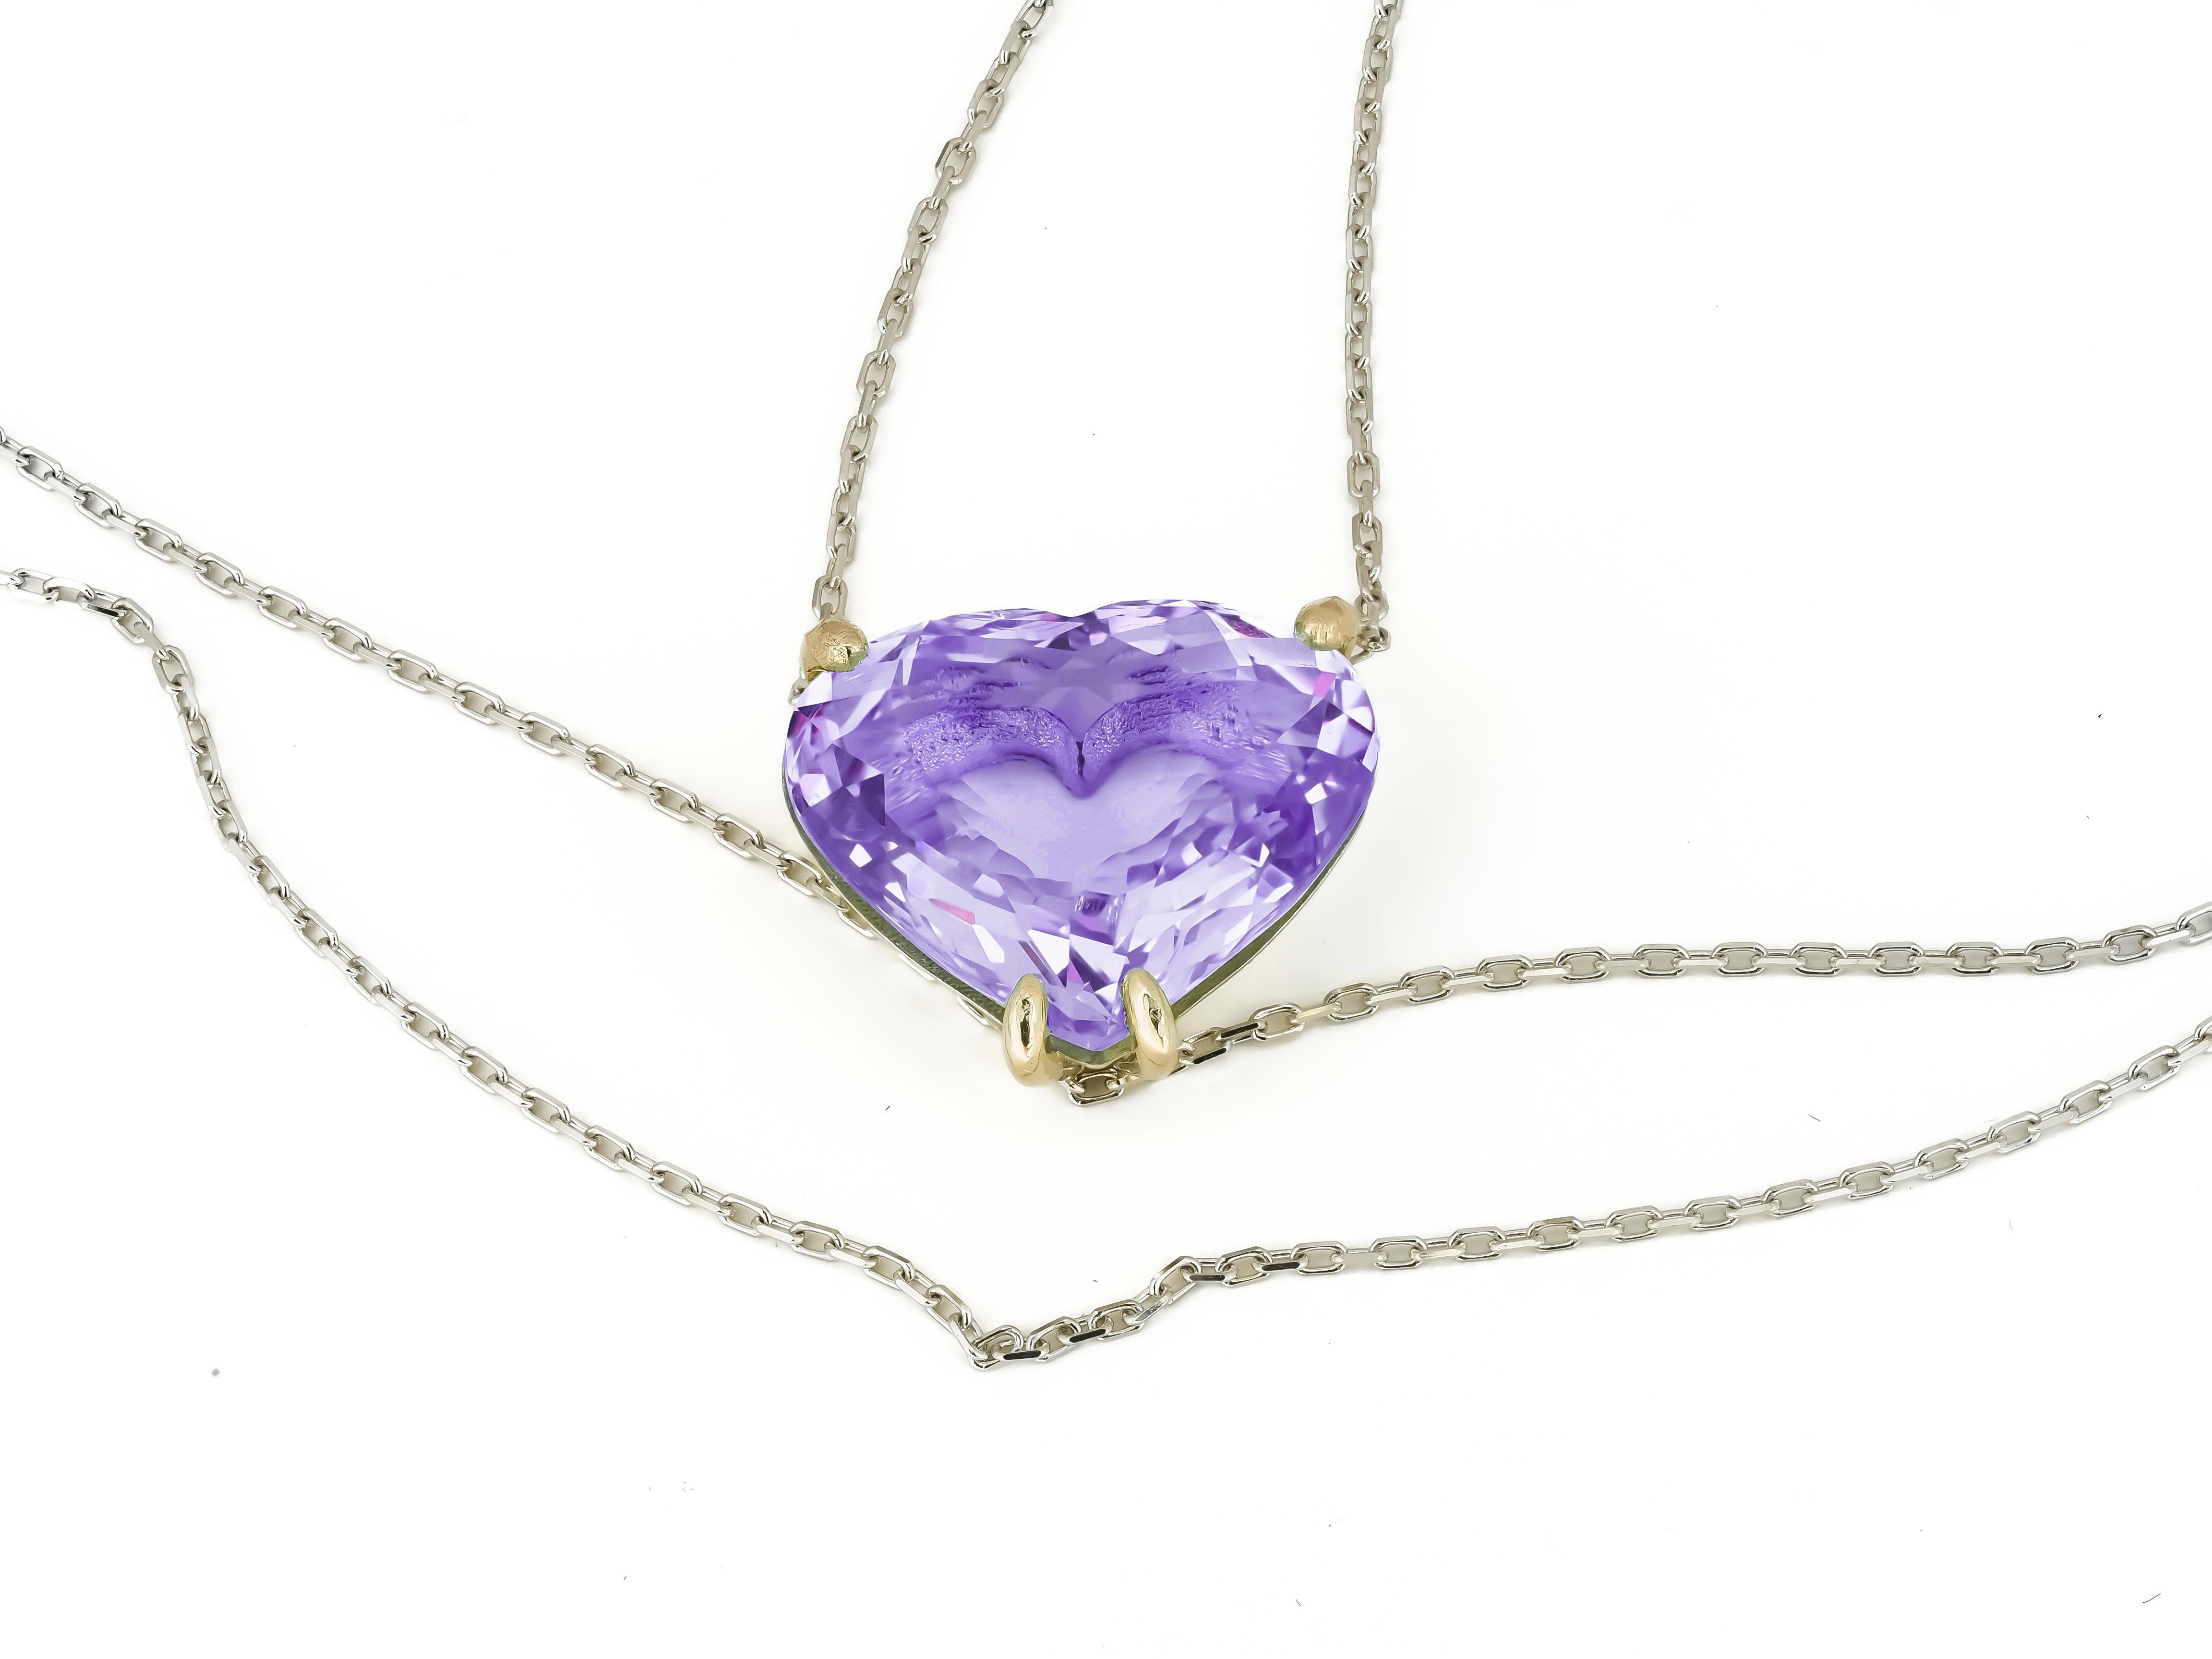 Heart Cut Heart shaped amethyst pendant necklace in 14k gold.  For Sale